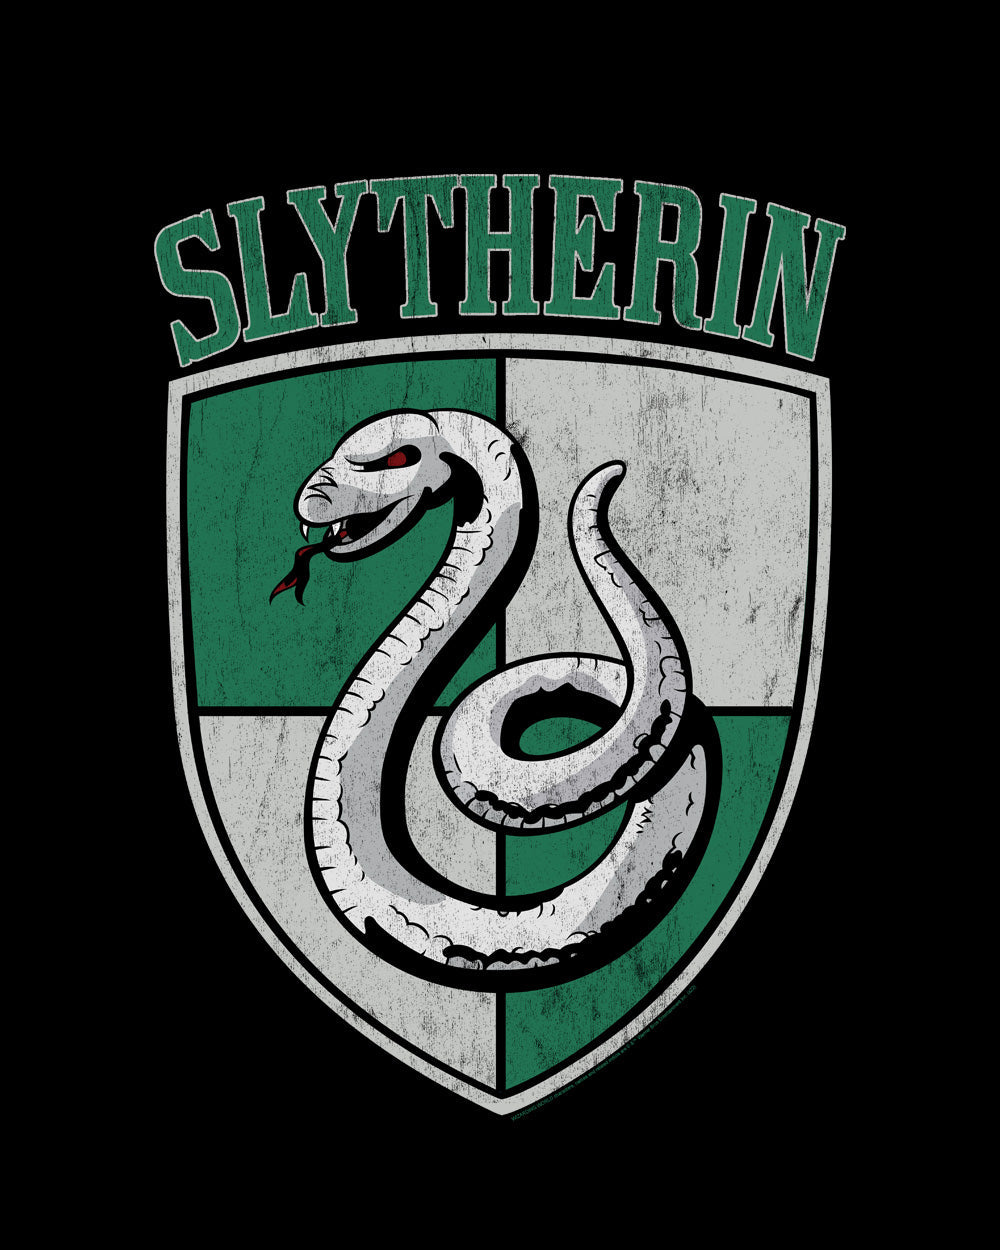 Harry Potter Slytherin Crest Hogwarts Witchcraft Wizardry School Officially Licensed Cotton T-Shirt